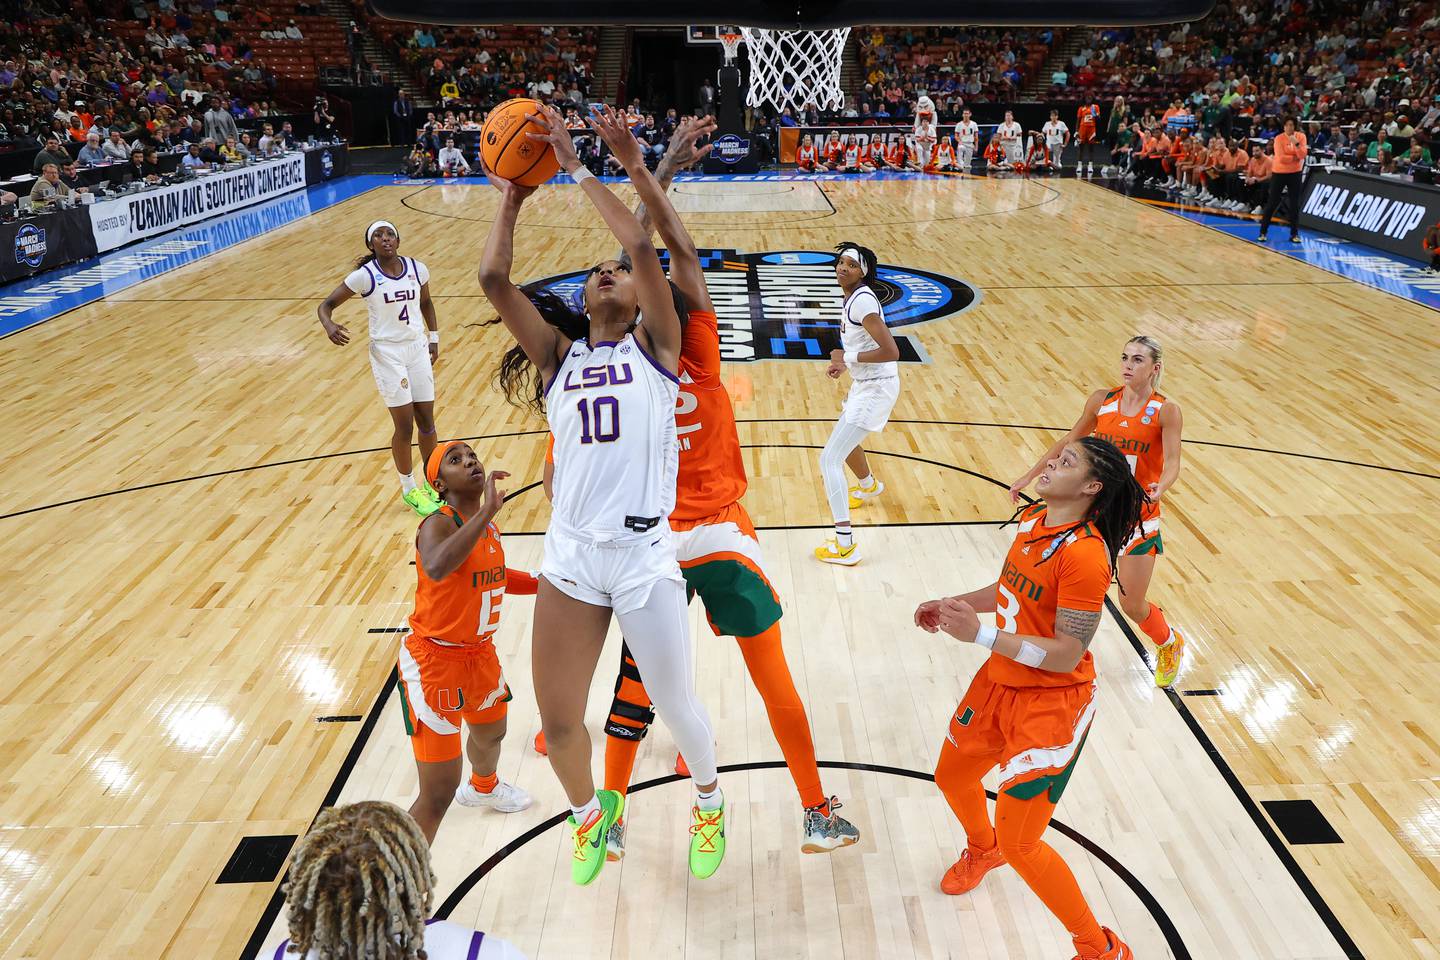 GREENVILLE, SOUTH CAROLINA - MARCH 26: Angel Reese #10 of the LSU Lady Tigers shoots the ball against the Miami Hurricanes during the third quarter in the Elite Eight round of the NCAA Women's Basketball Tournament at Bon Secours Wellness Arena on March 26, 2023 in Greenville, South Carolina.